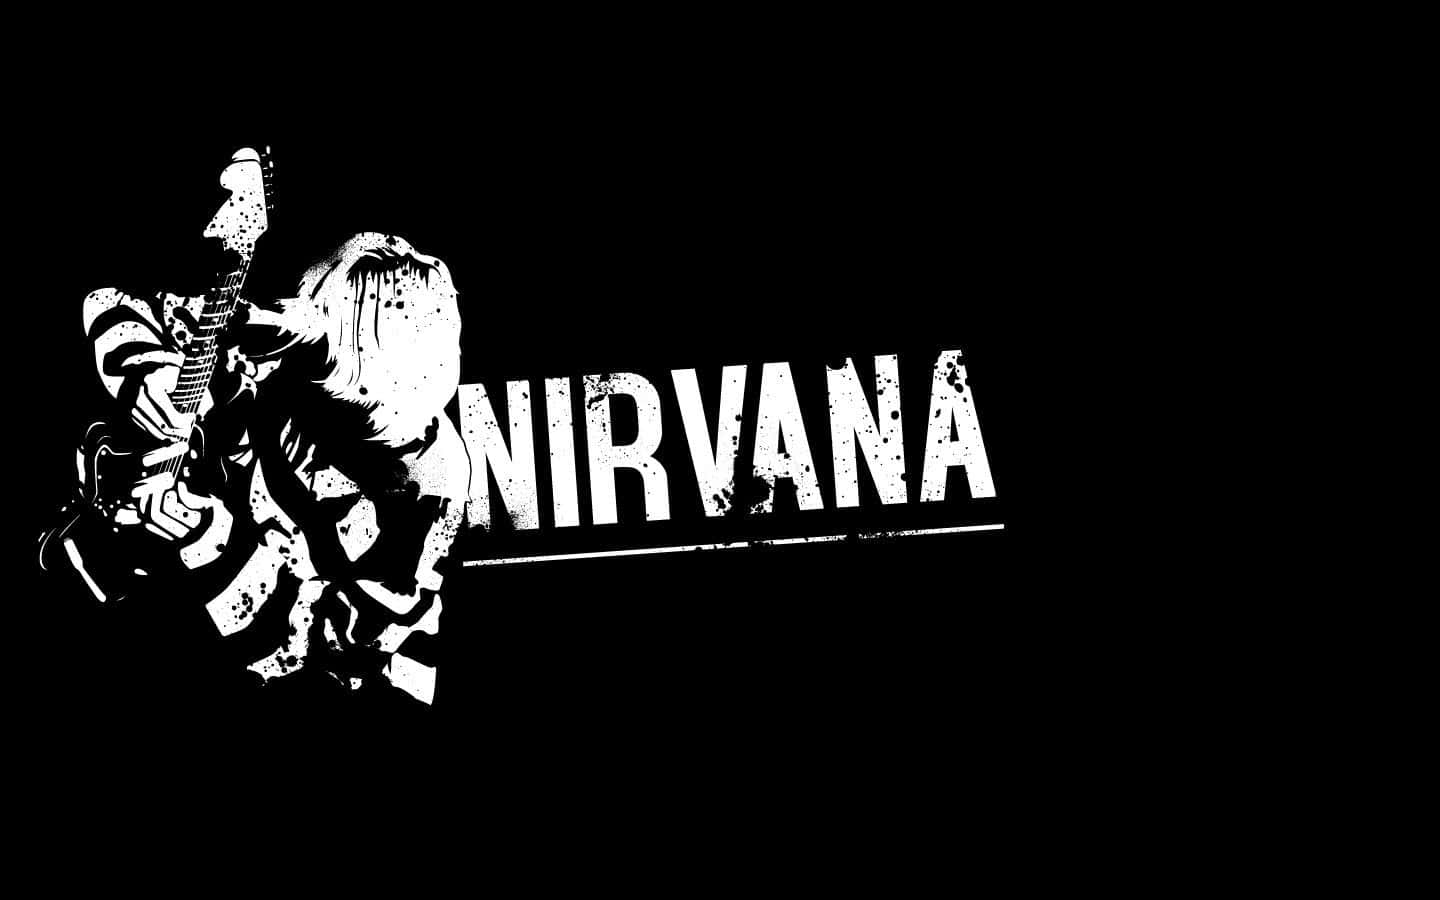 The Iconic Nirvana Smiley Face Logo on a Grunge Wall Background